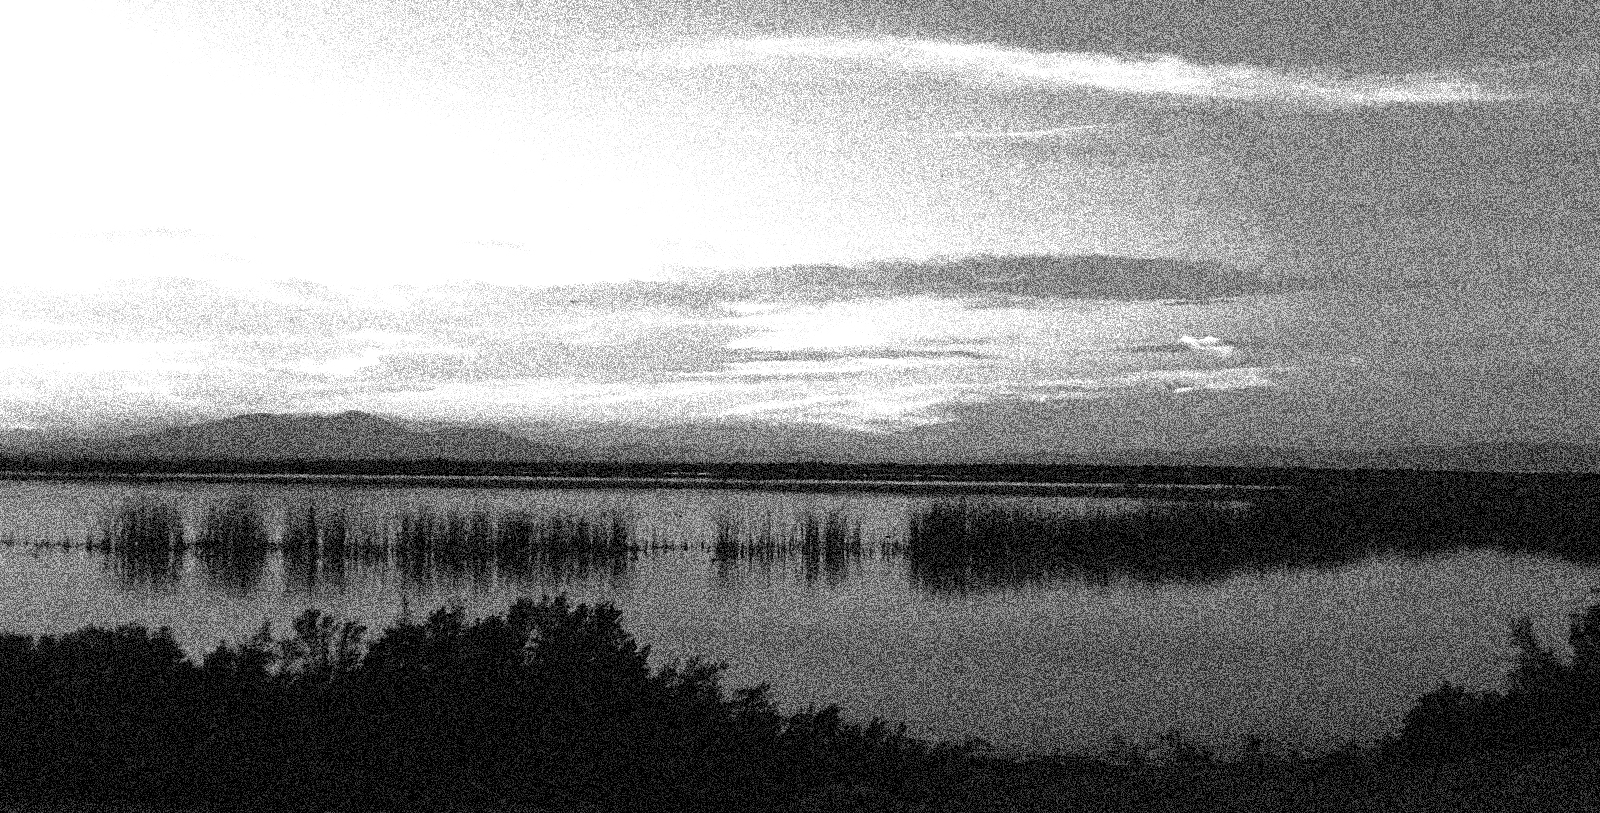 A grainy black-and-white image of a the Salton Sea at sunset. In the foreground, plants grow out of placid waters. In the distance are low mountains.